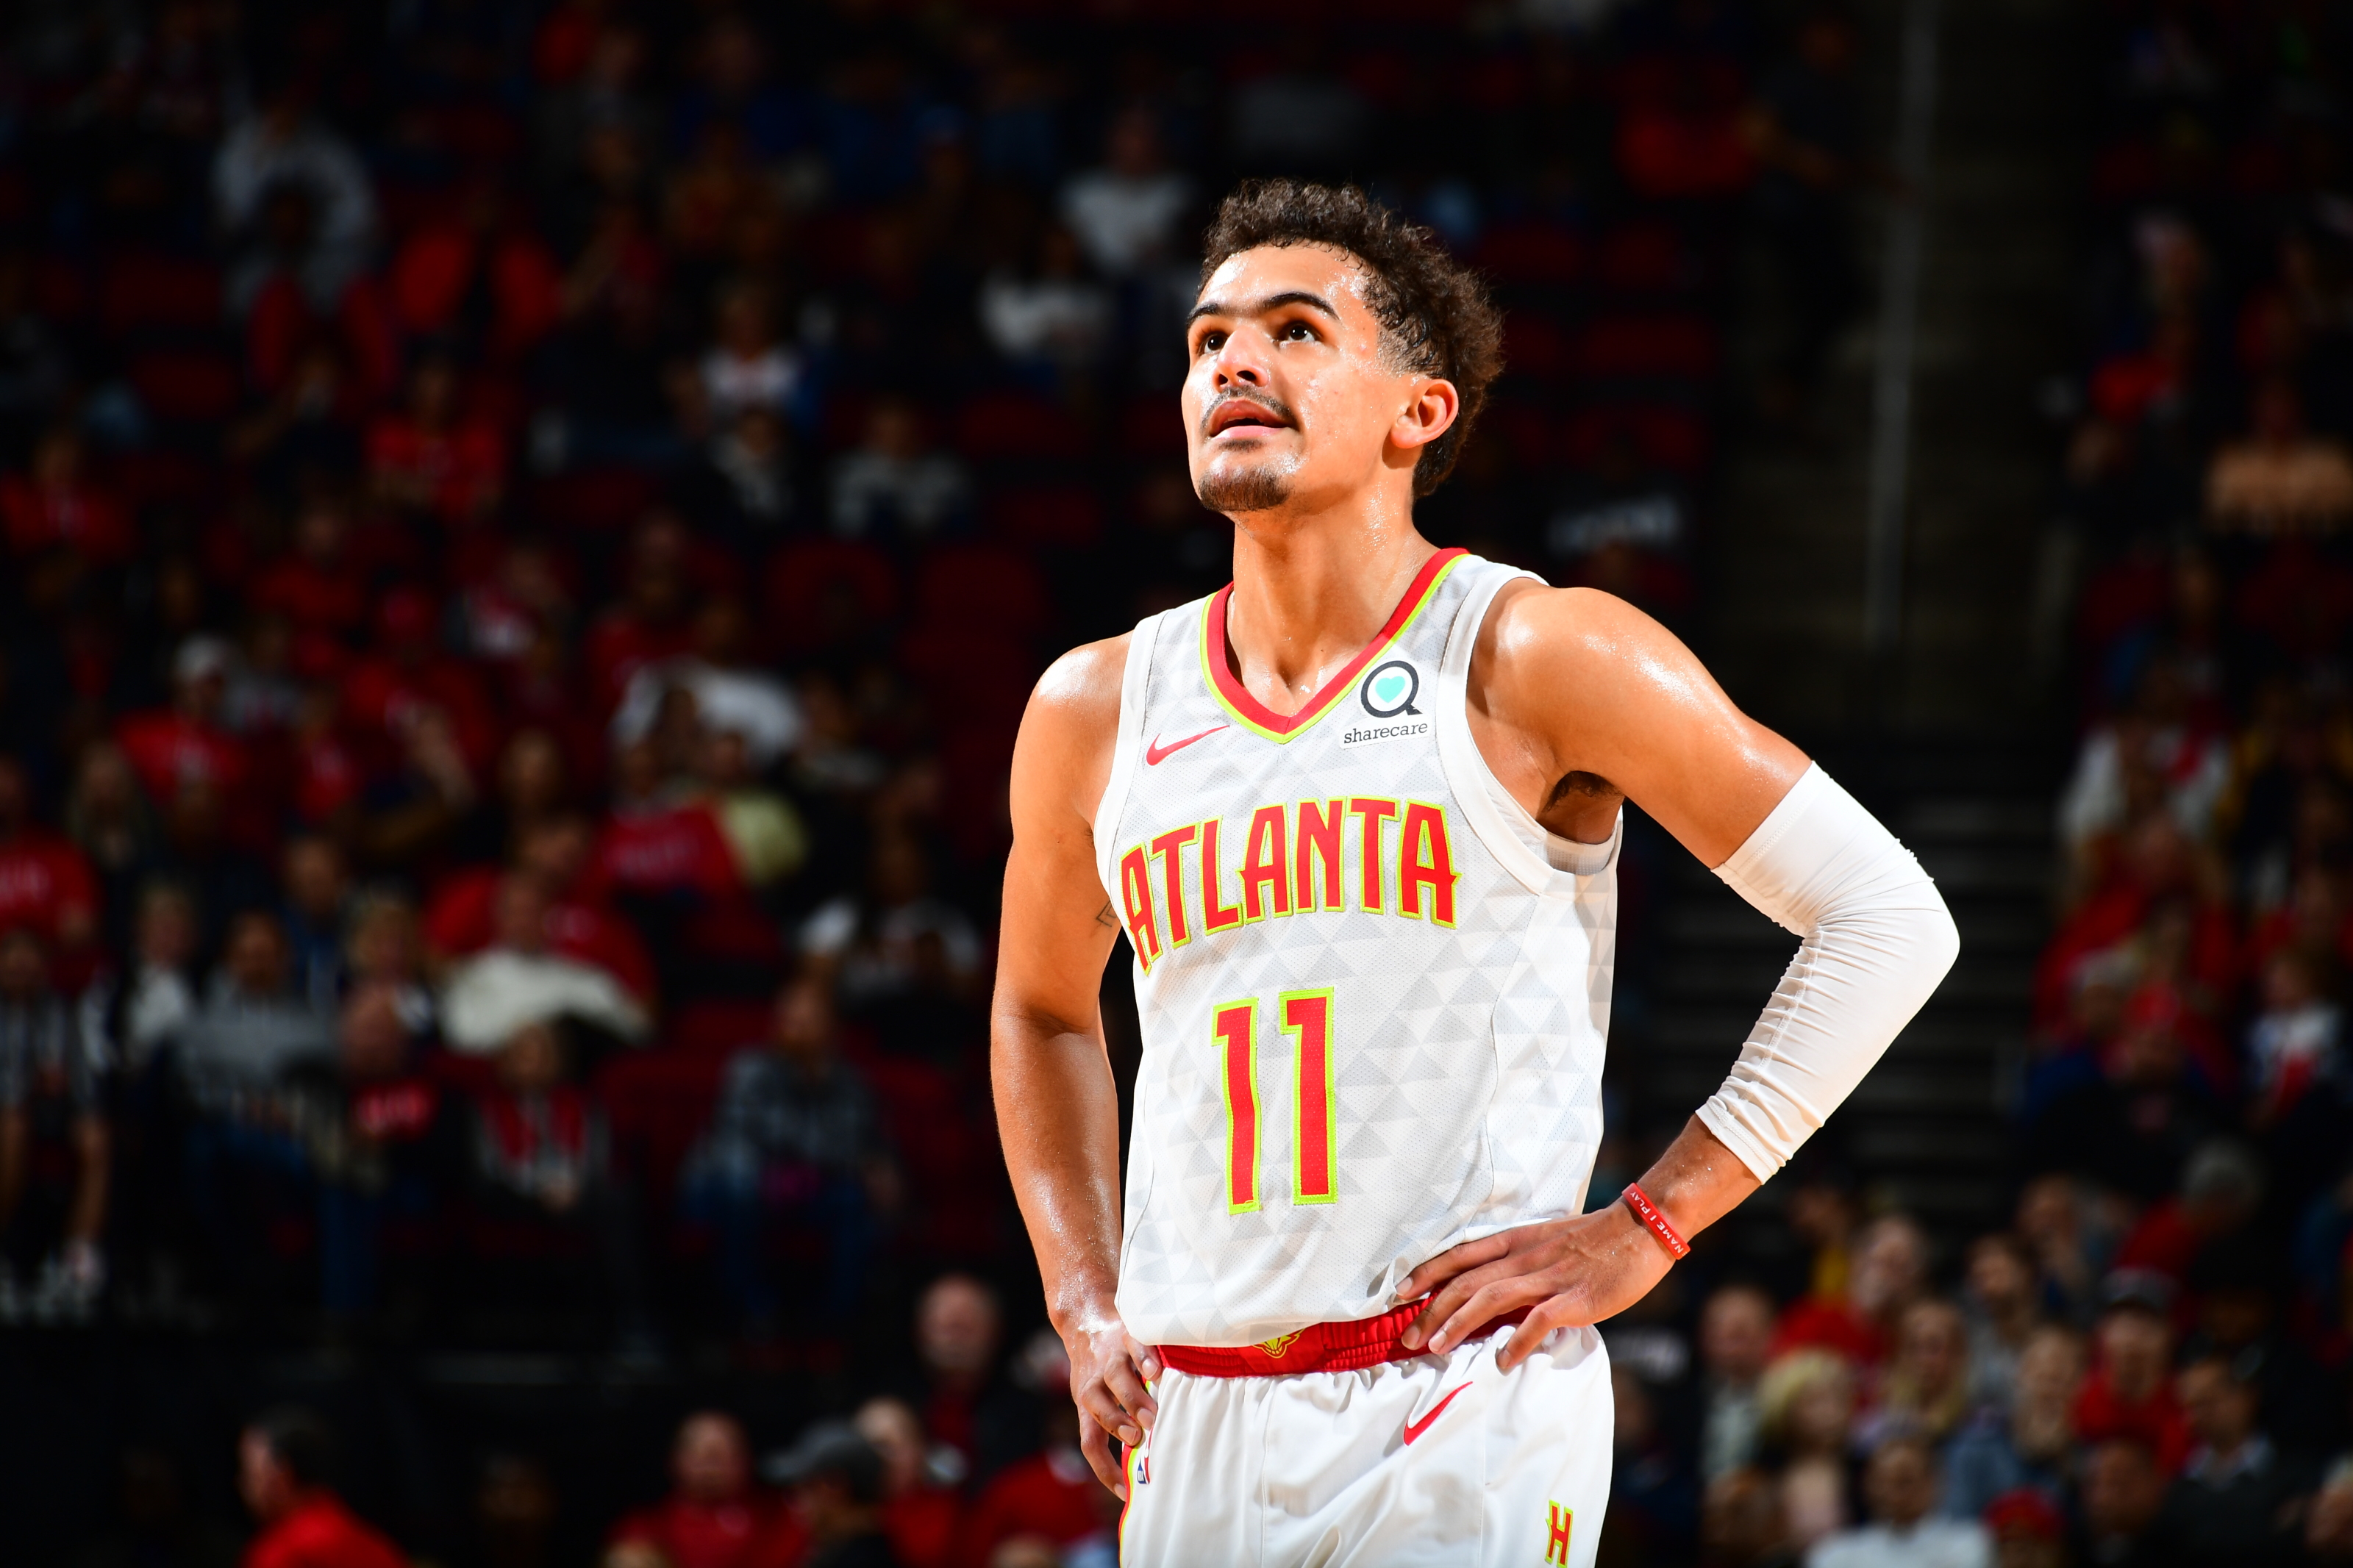 ice trae young wallpaper